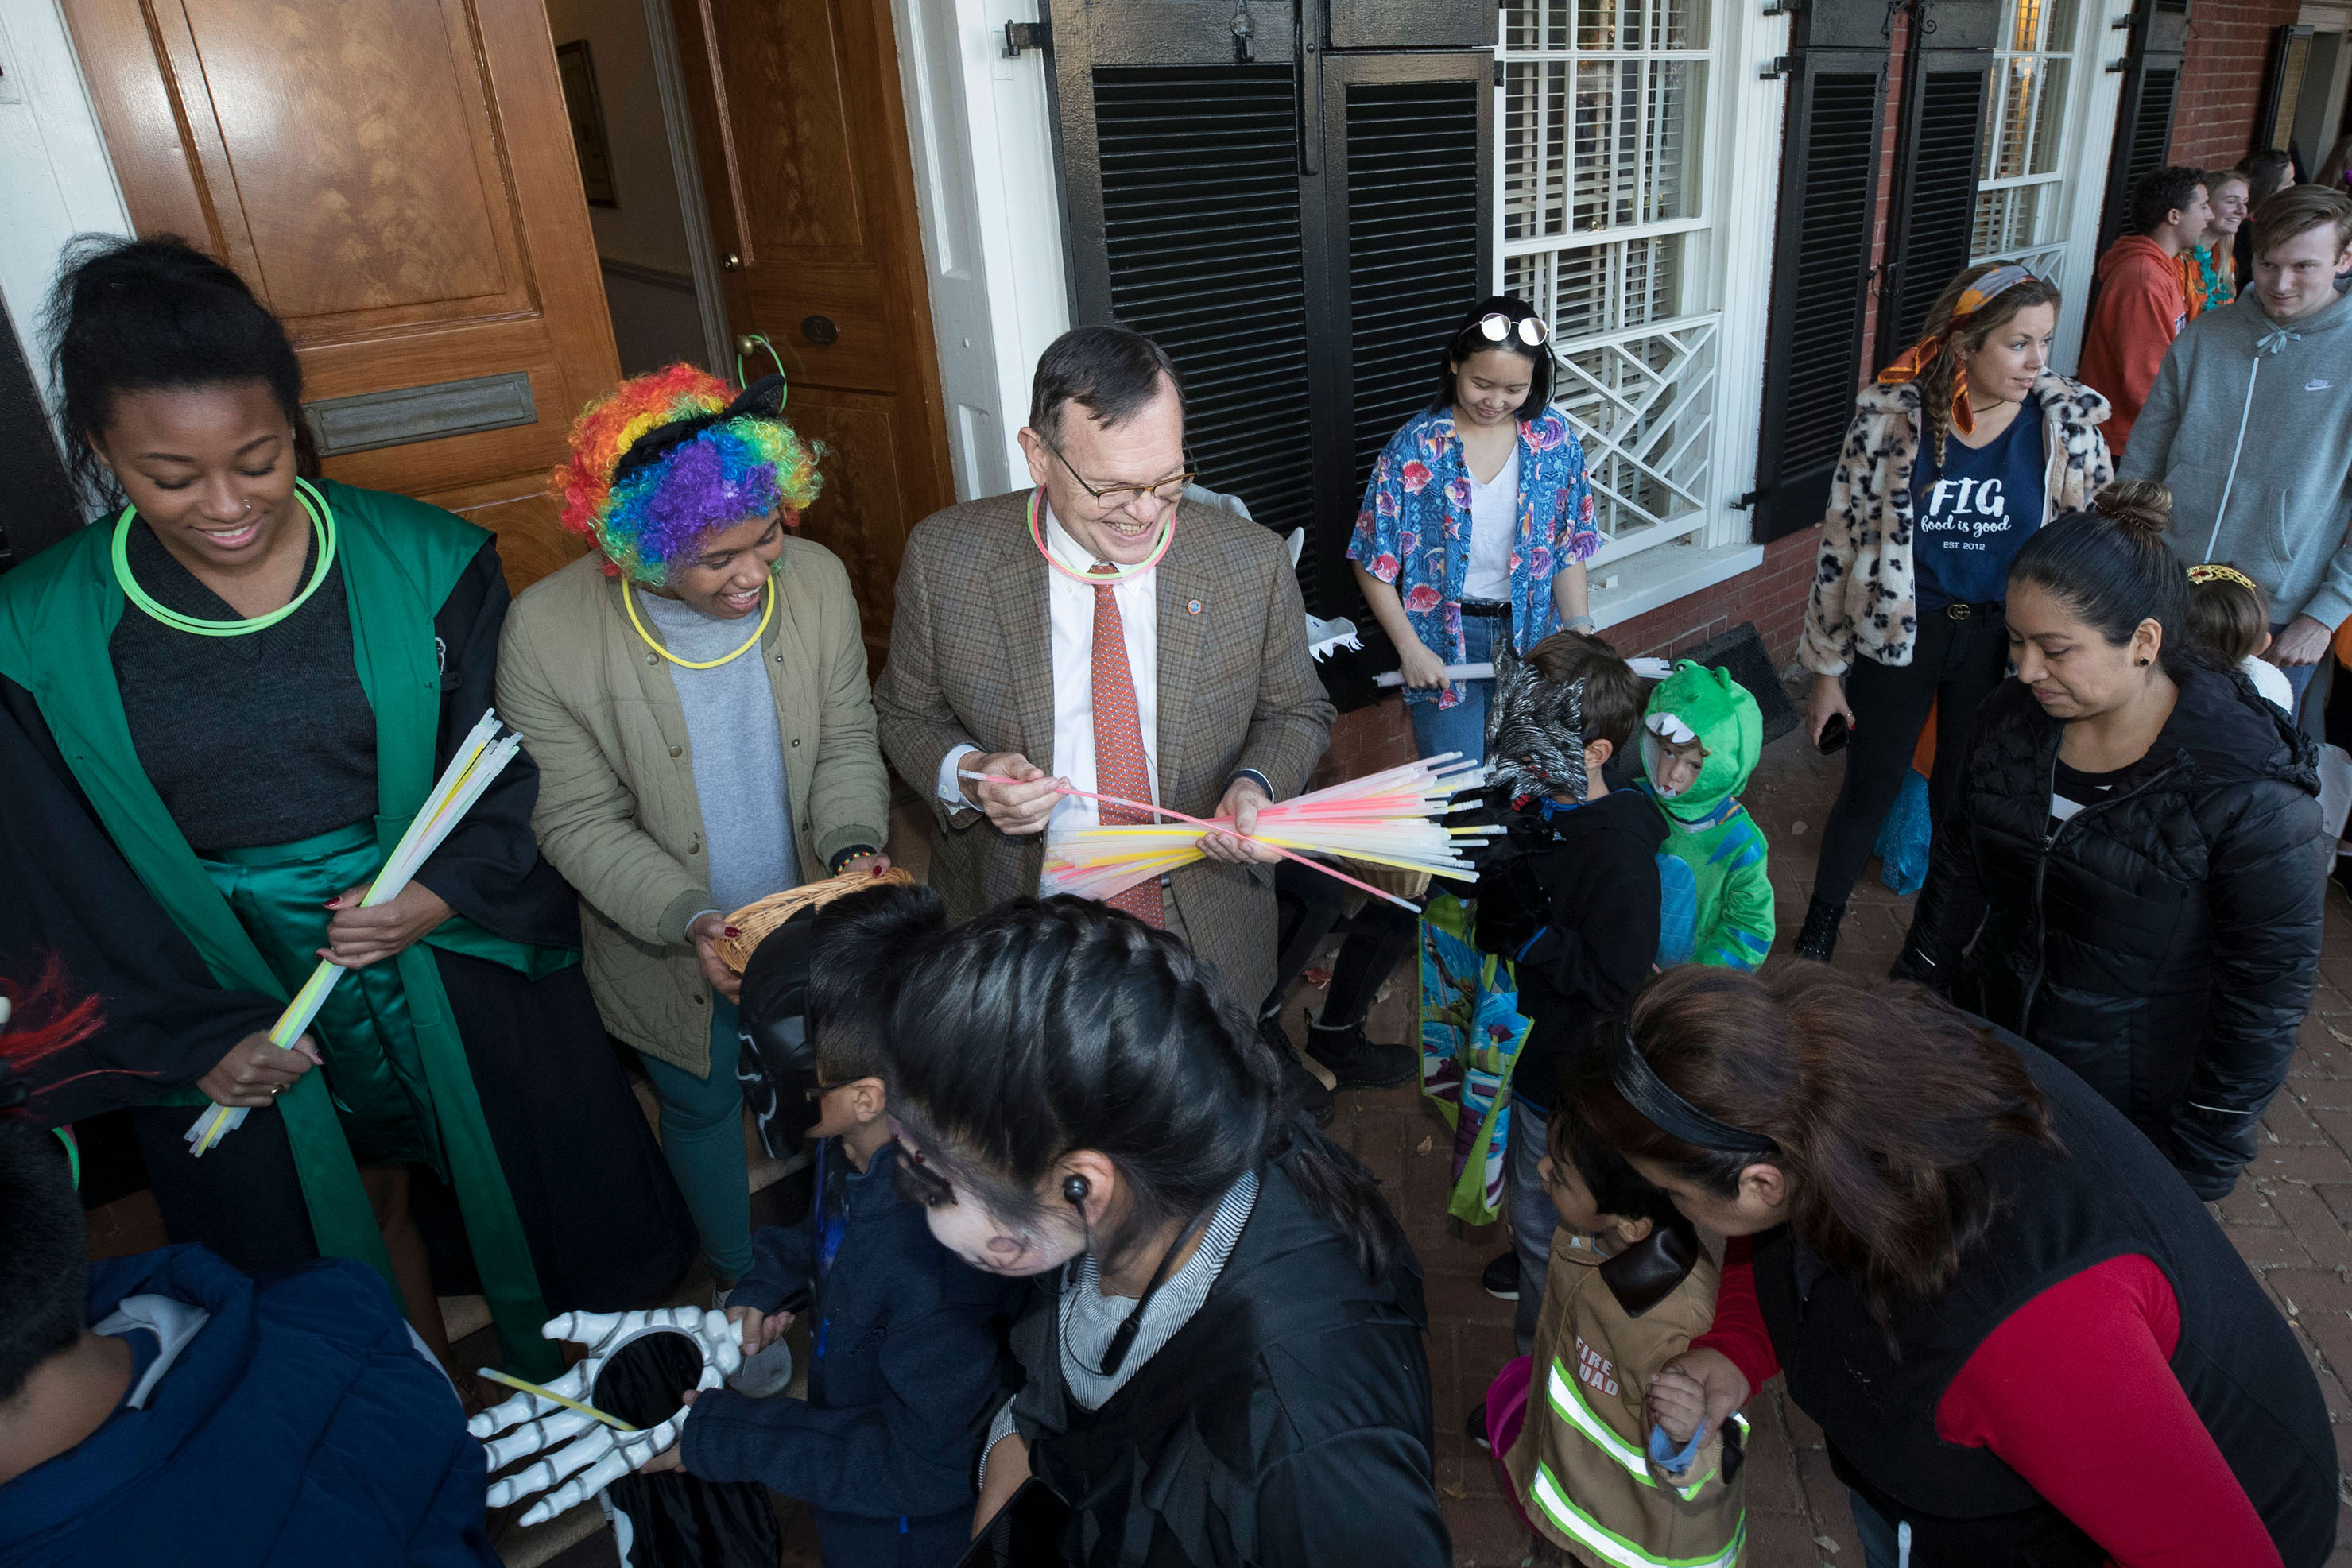 UVA professors handing out glow sticks to children trick or treating